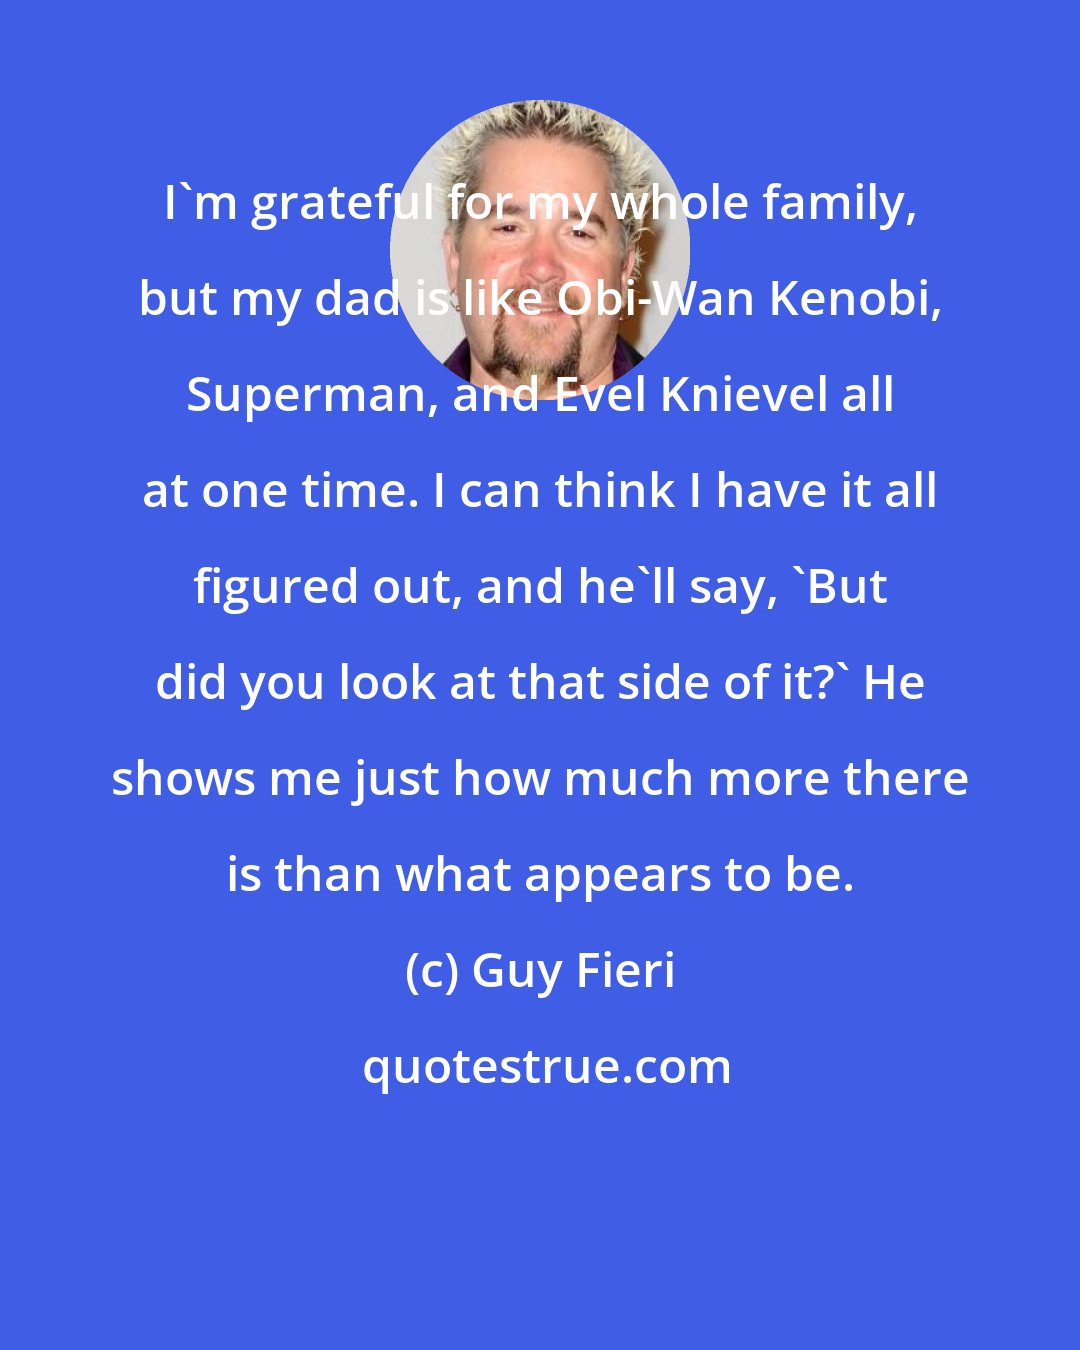 Guy Fieri: I'm grateful for my whole family, but my dad is like Obi-Wan Kenobi, Superman, and Evel Knievel all at one time. I can think I have it all figured out, and he'll say, 'But did you look at that side of it?' He shows me just how much more there is than what appears to be.